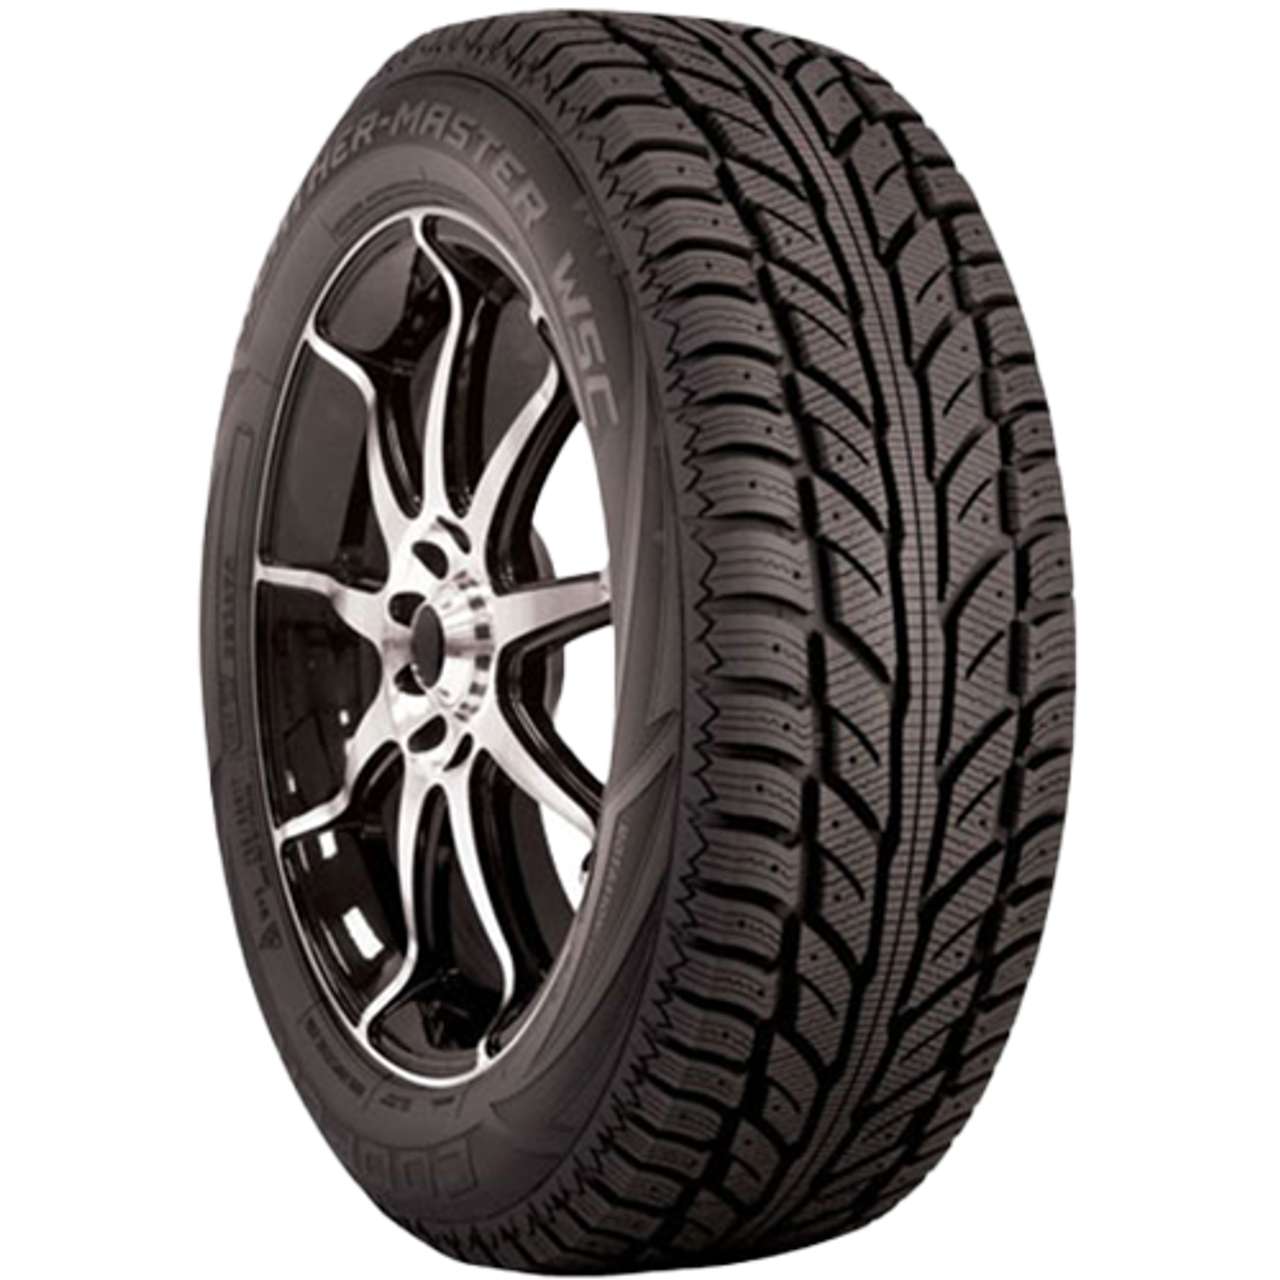 COOPER WEATHERMASTER WSC 255/55R20 110T STUDDABLE BSW